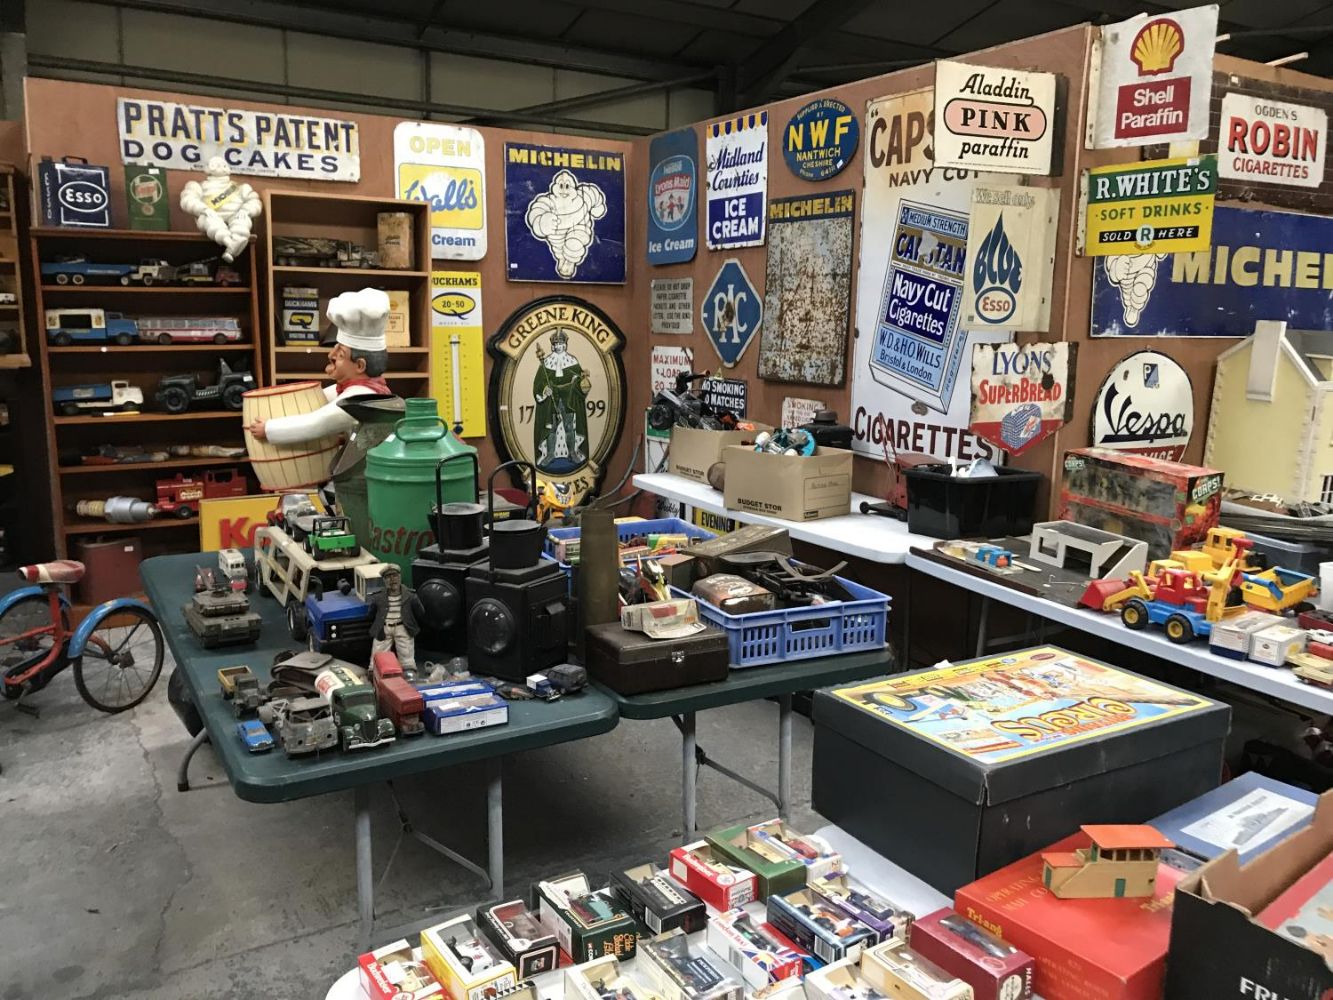 TWO DAY AUCTION OF COLLECTABLES, ANTIQUES, JEWELLERY, FURNITURE, VINTAGE ITEMS, TOOLS ETC.